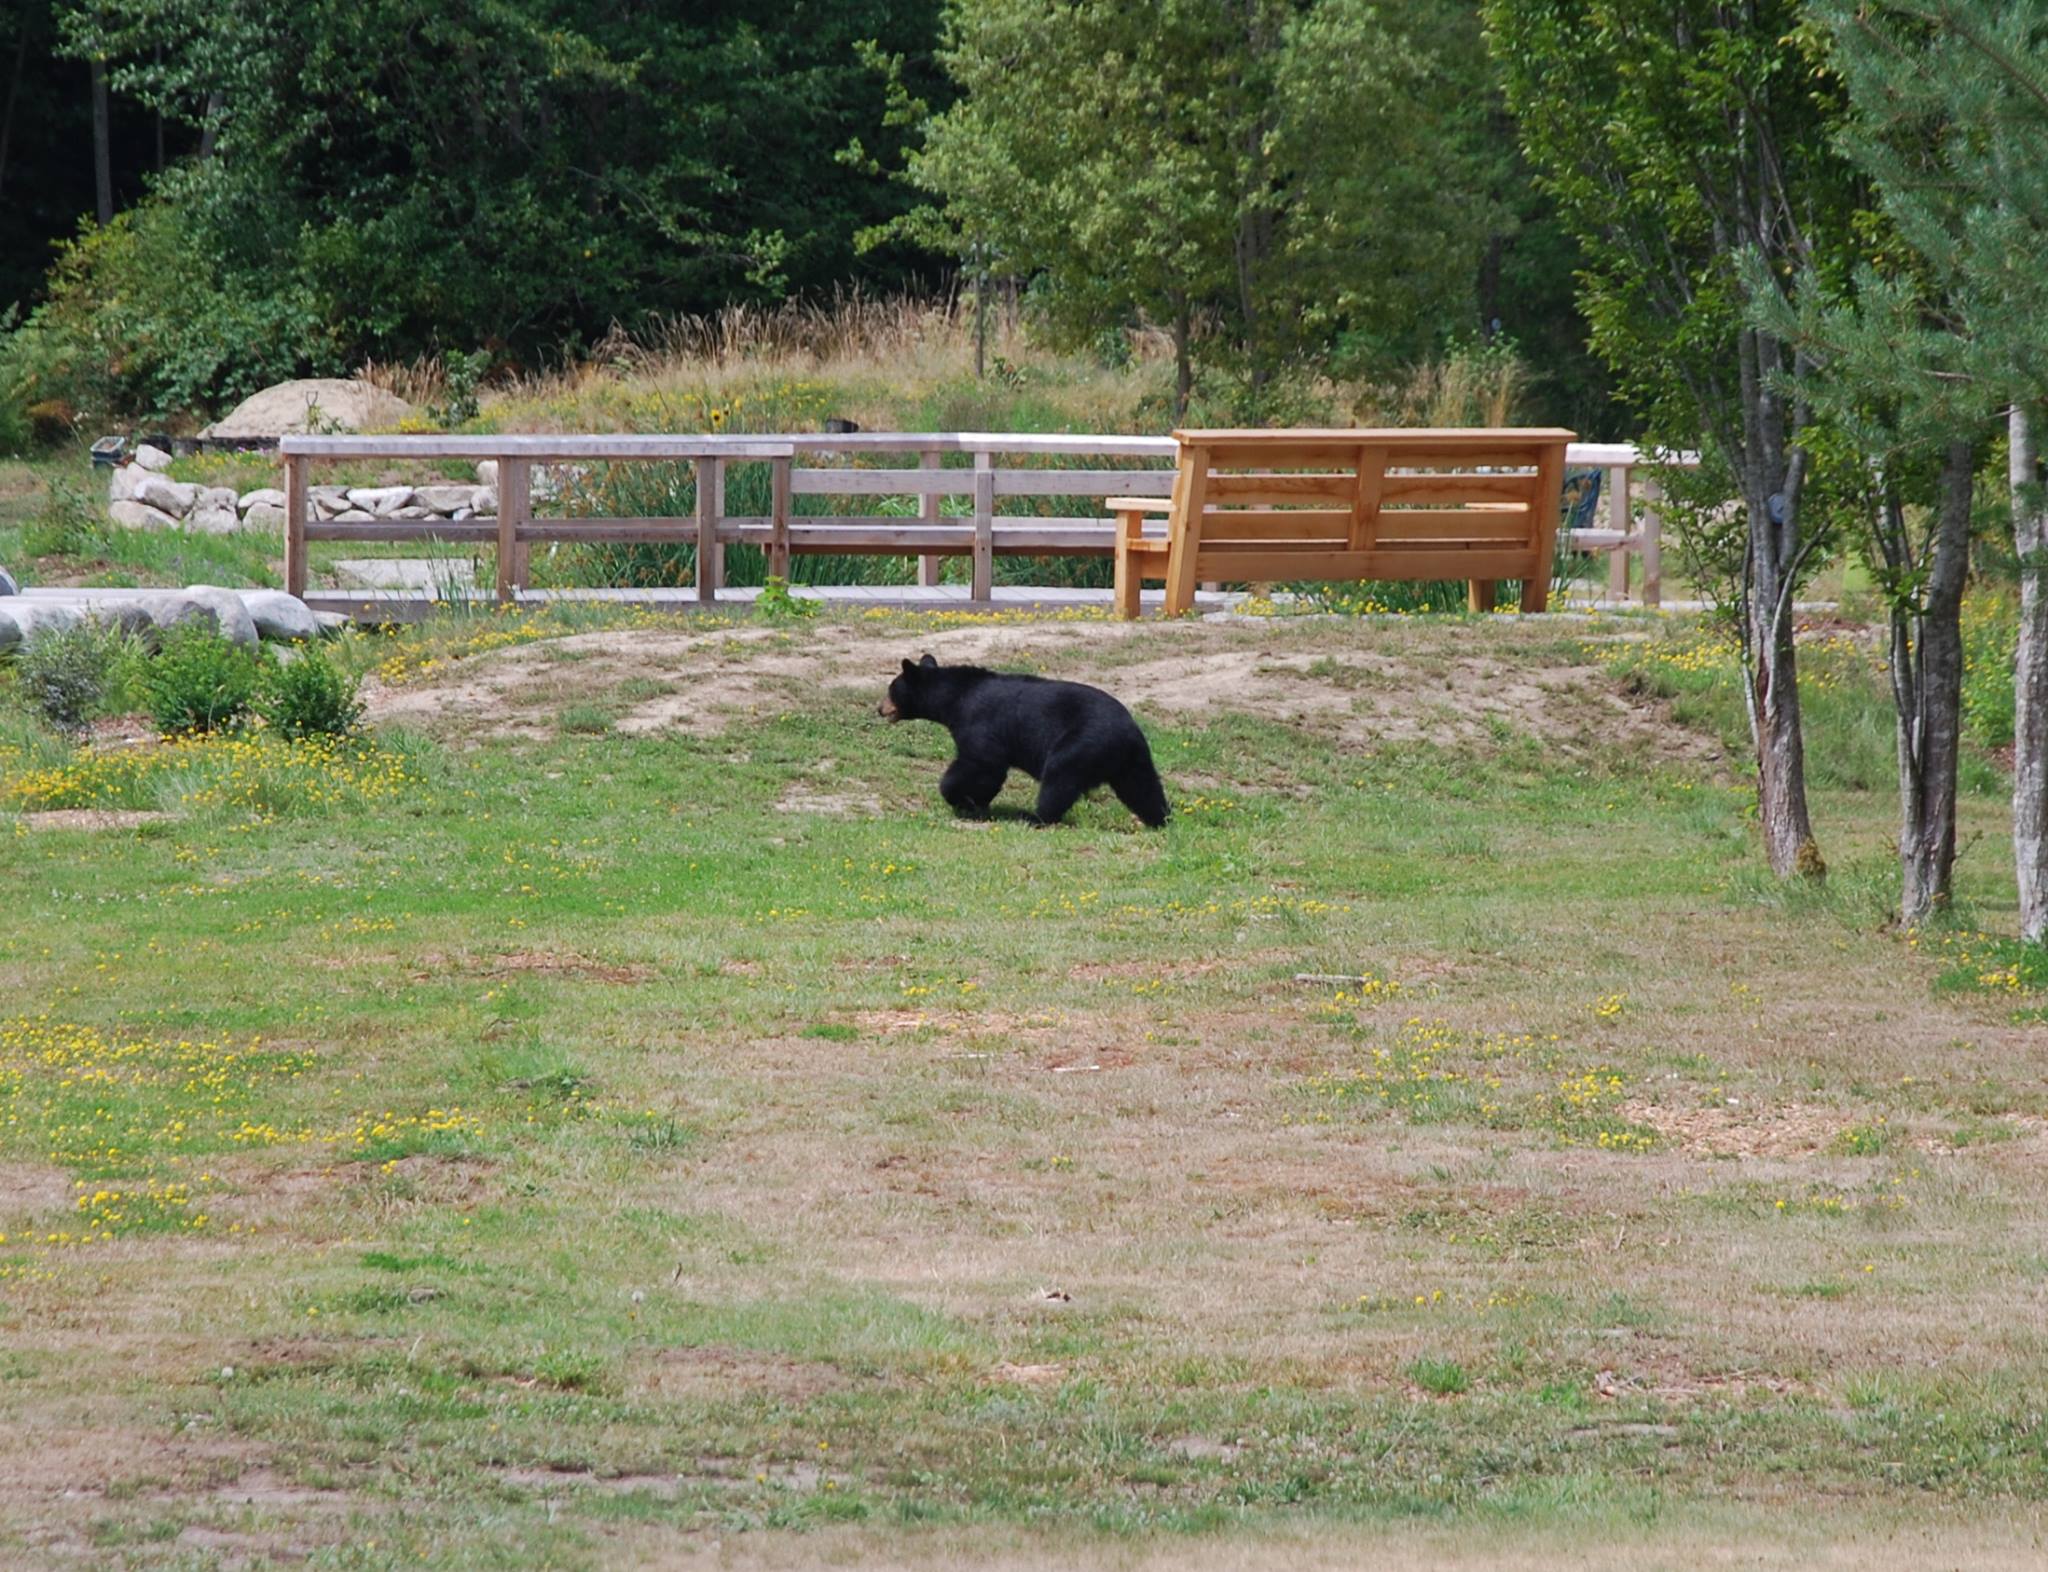 A distant capture of a sleek black bear roaming around the boardwalk of the Dragonfly Pond.